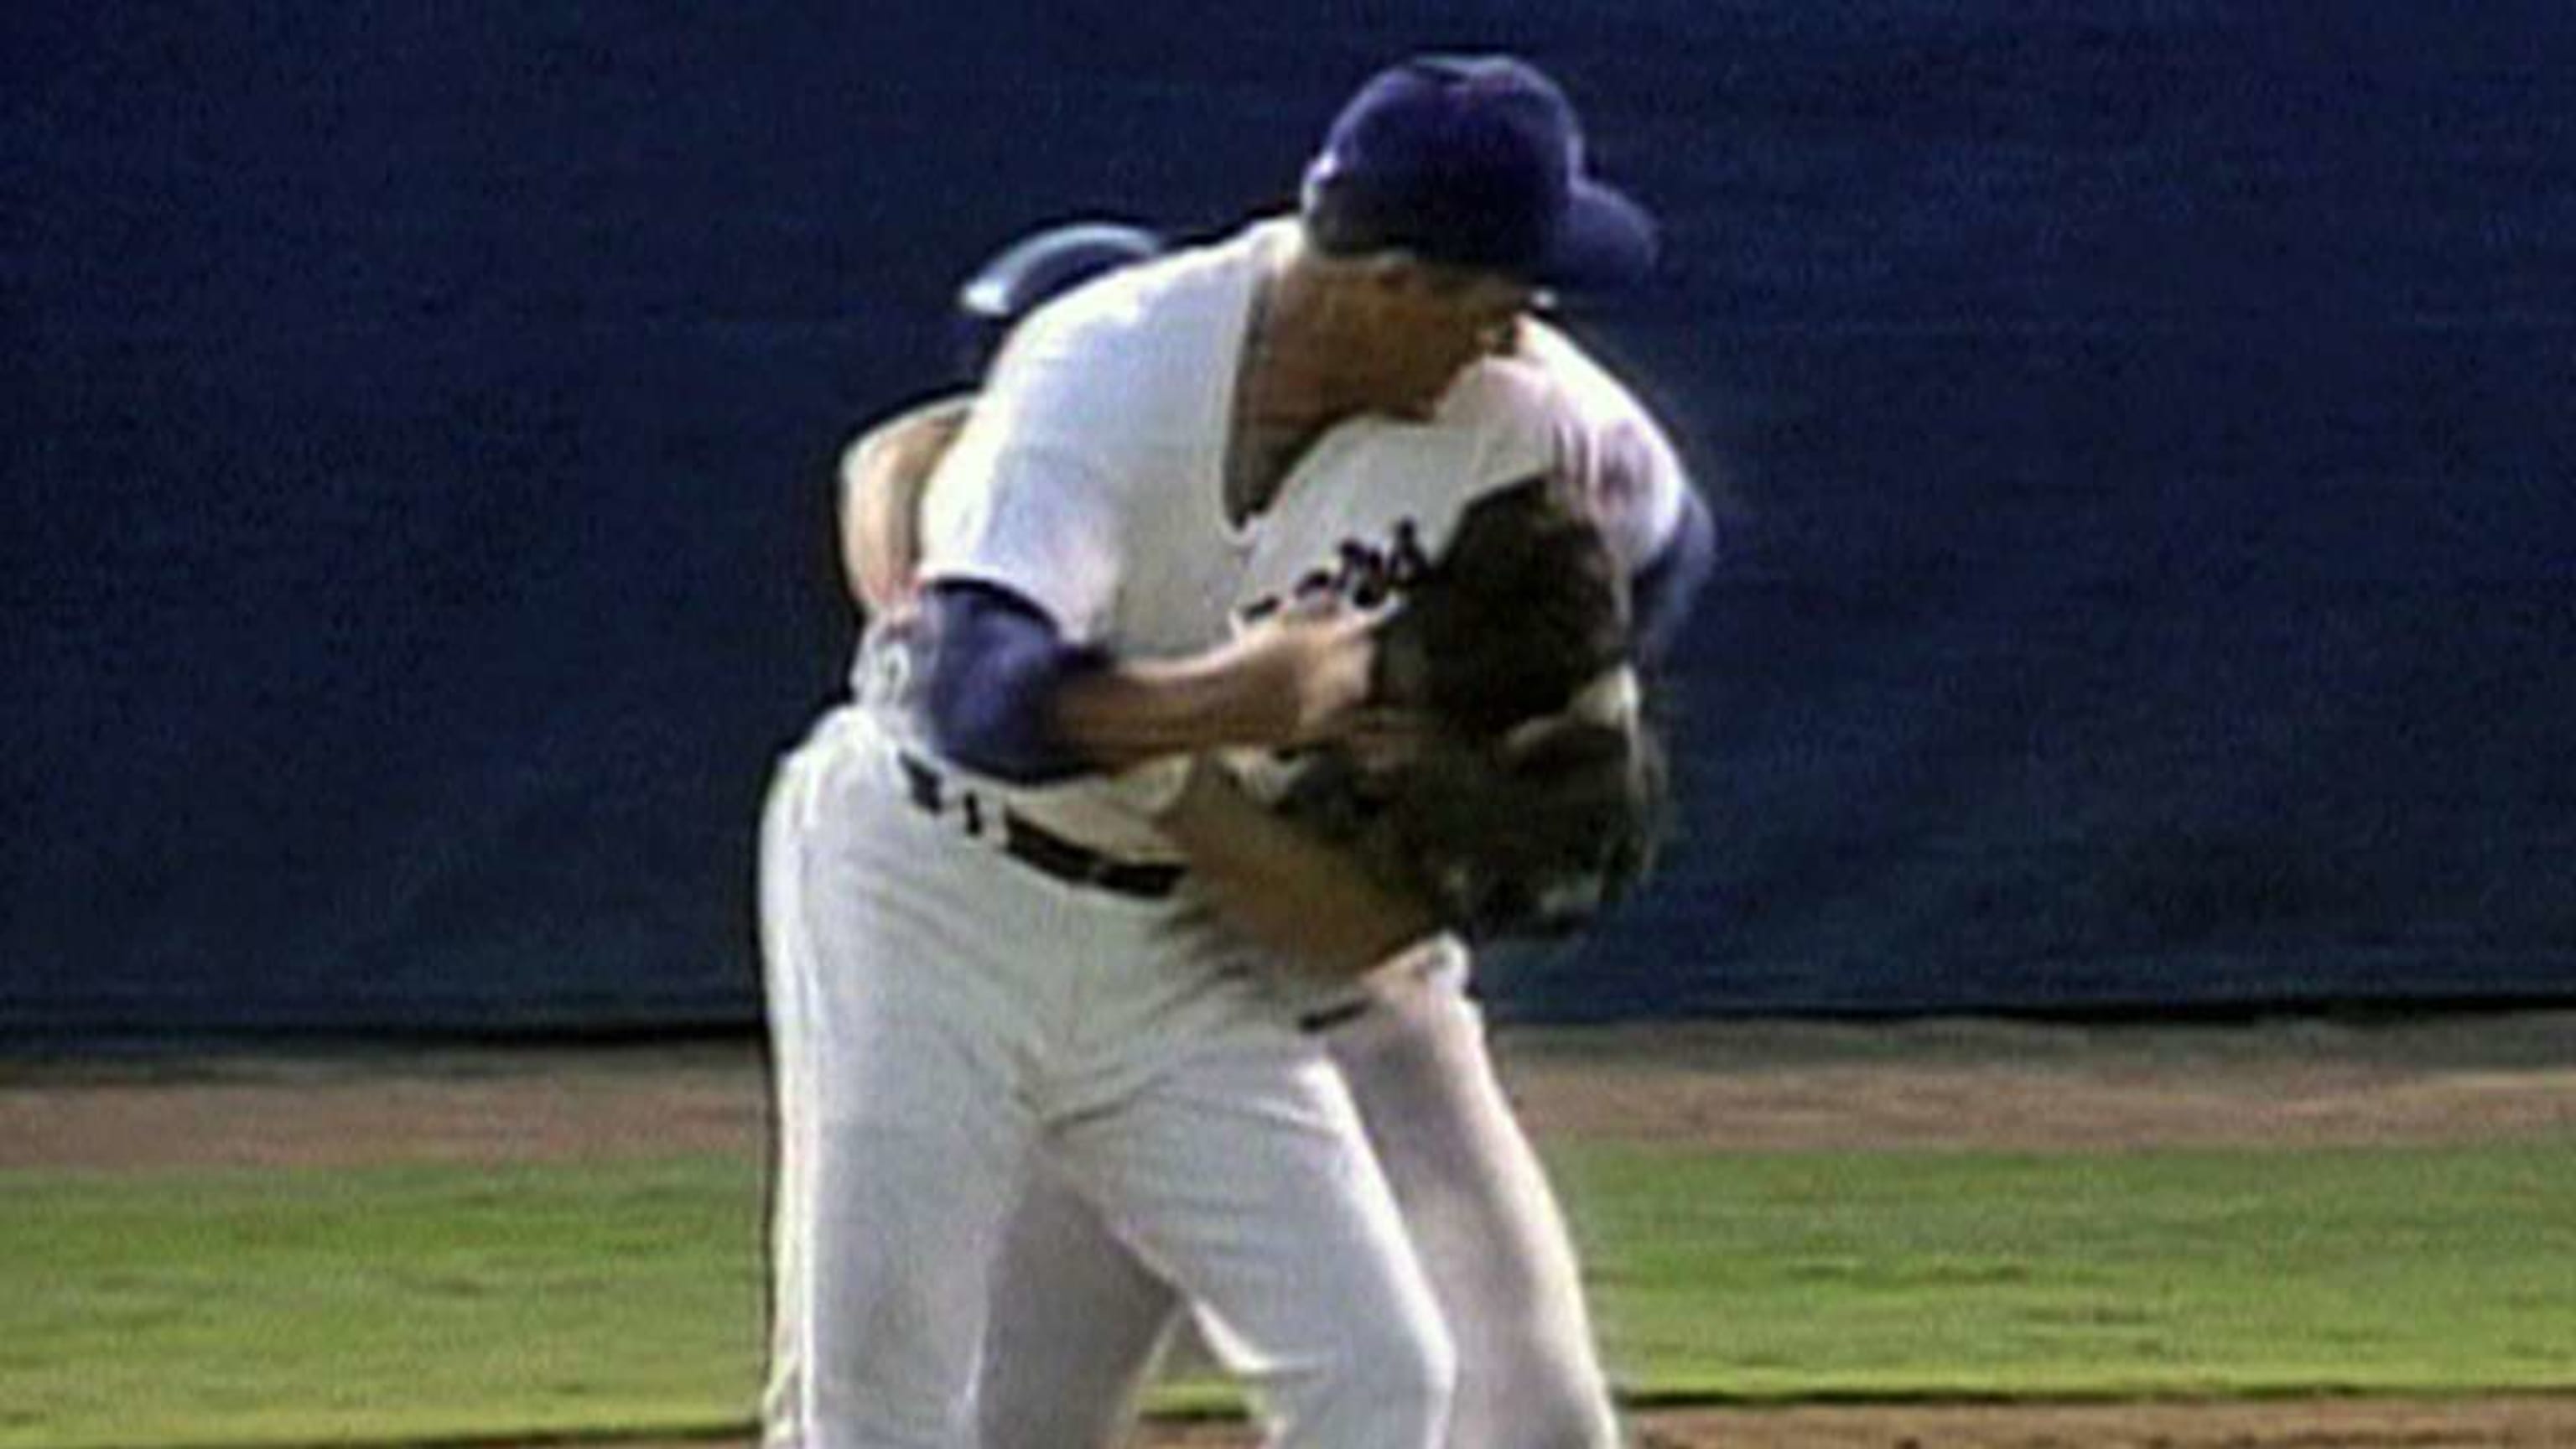 On this day, 24 years ago, Robin Ventura decided to take on Nolan